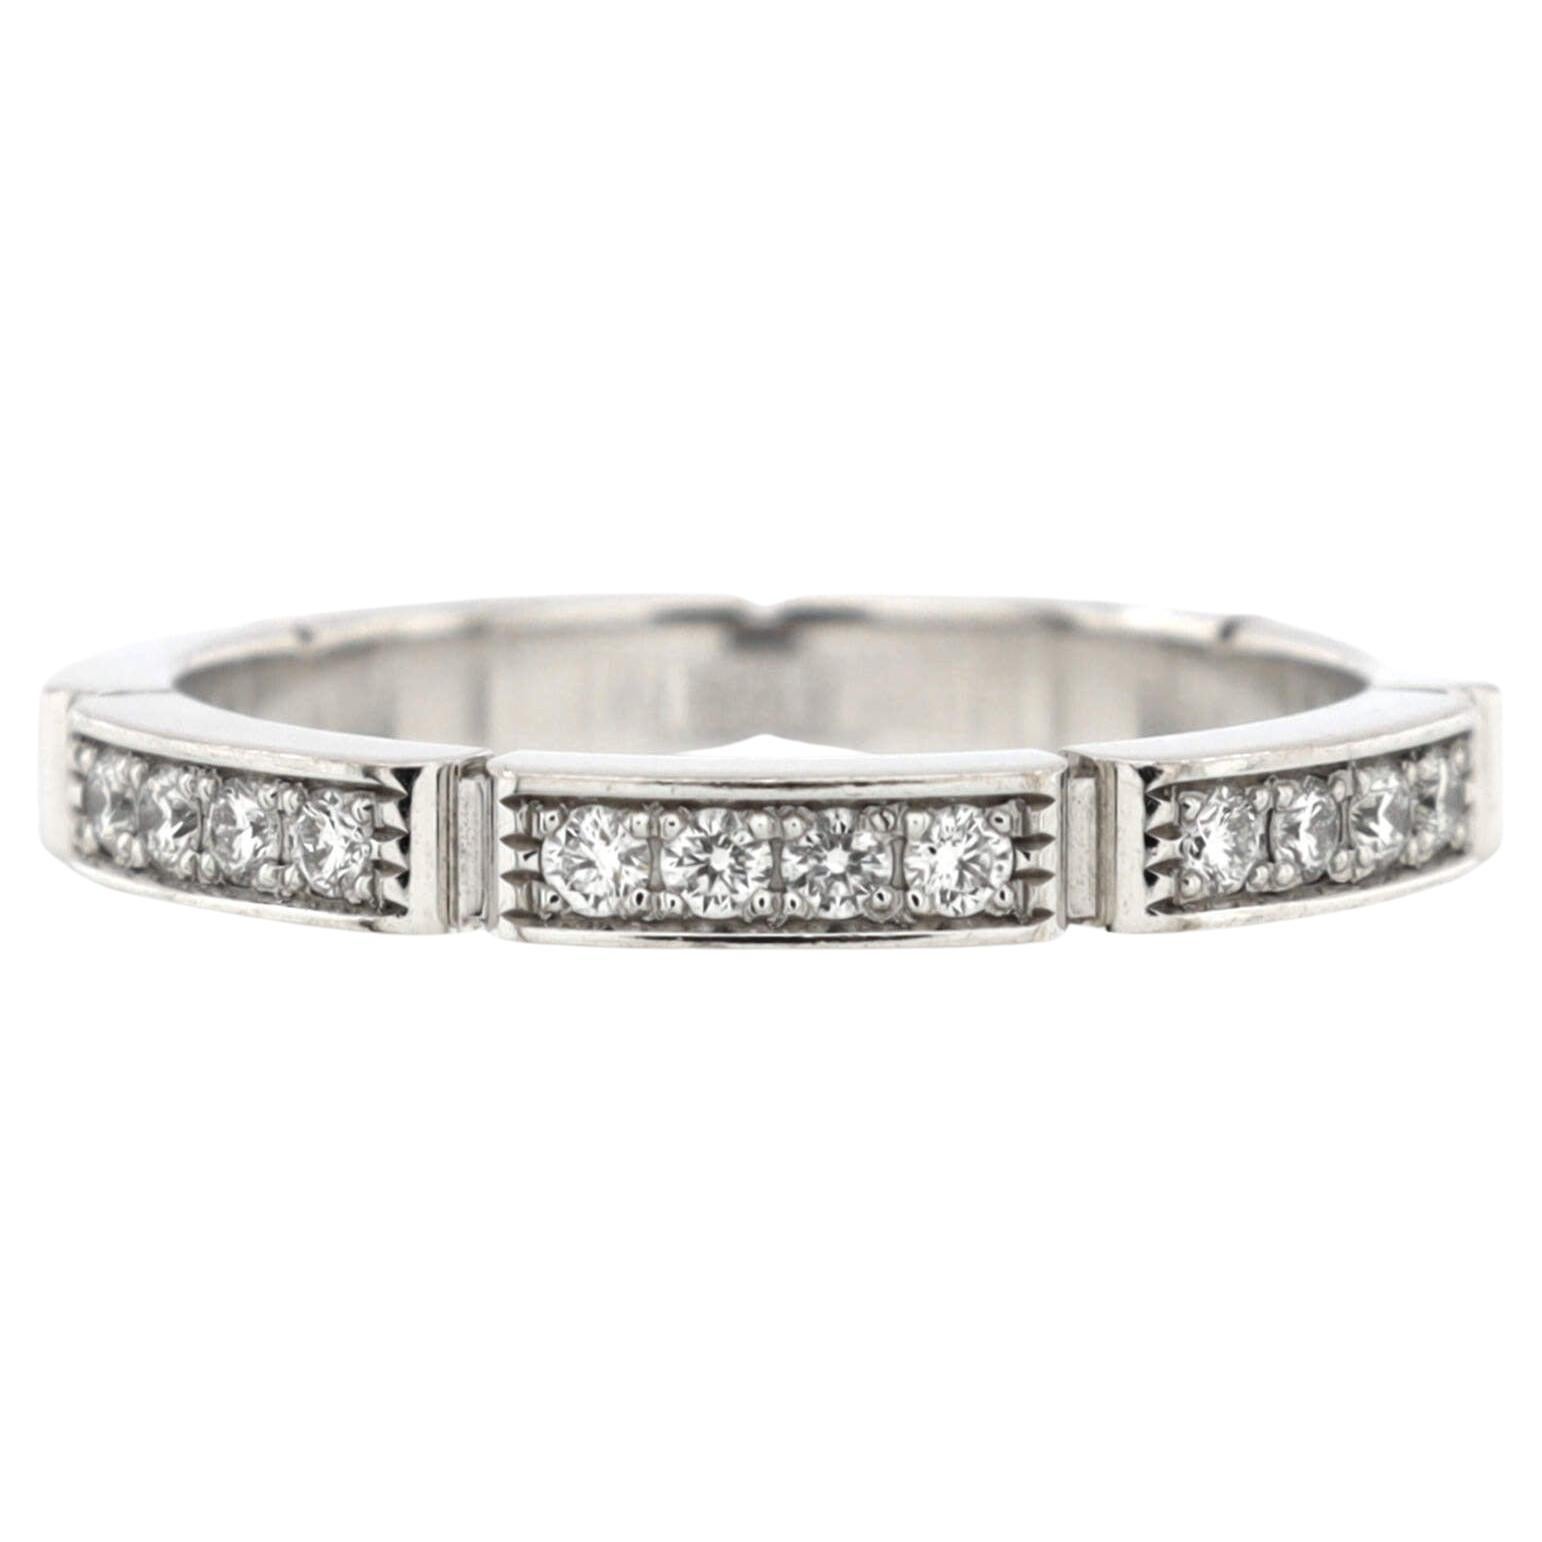 Cartier Maillon Panthere Band Ring 18K White Gold with Pave Diamonds